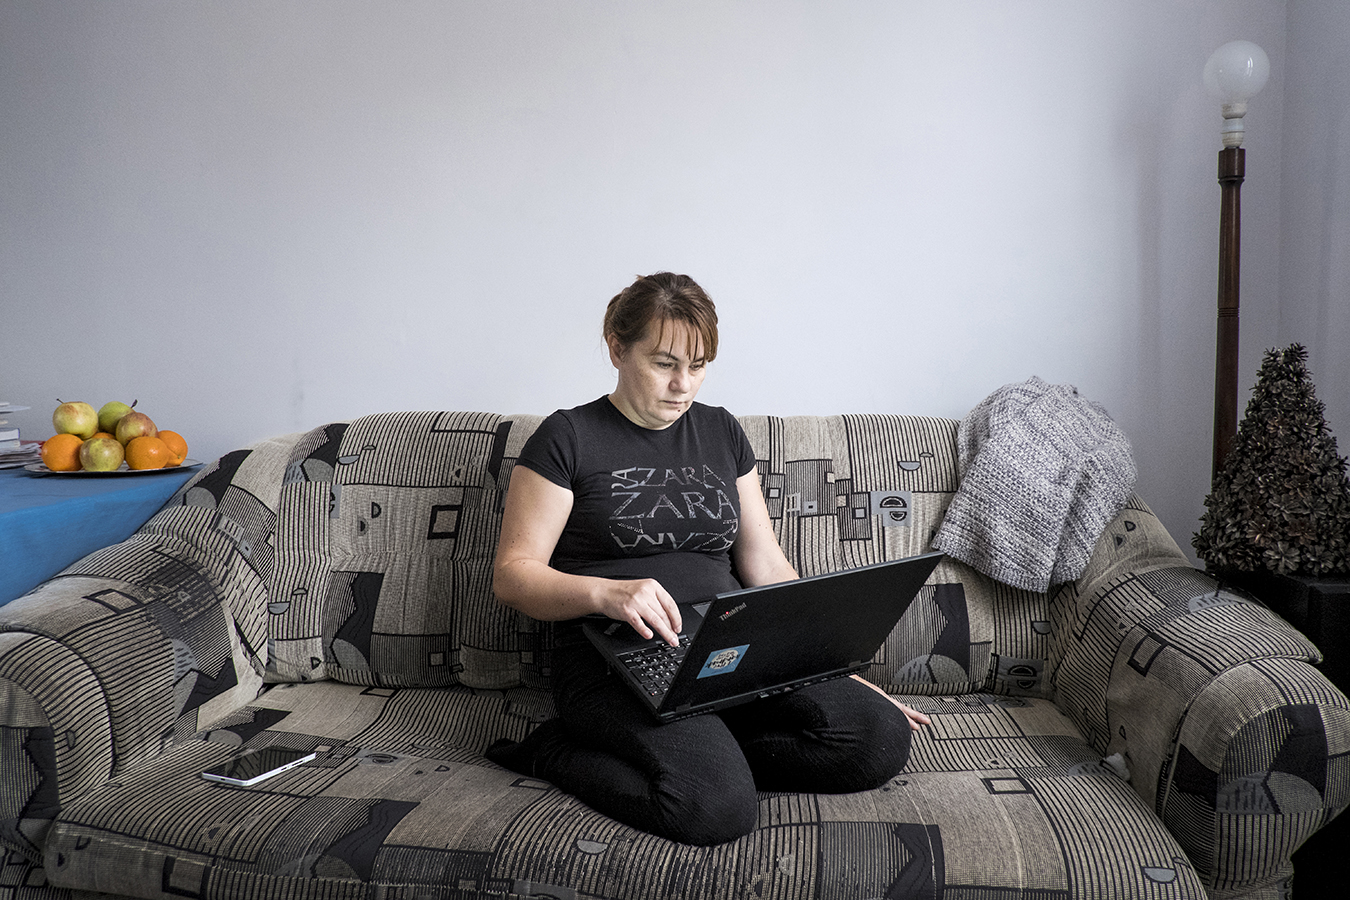  Justyna (43) aborted 10 years ago. She is a mother of three children and lives in a small town 100 km from Warsaw. Today, along with a few other women, she runs "Women in Web", a phone line and the only Internet forum for women who want to organize 